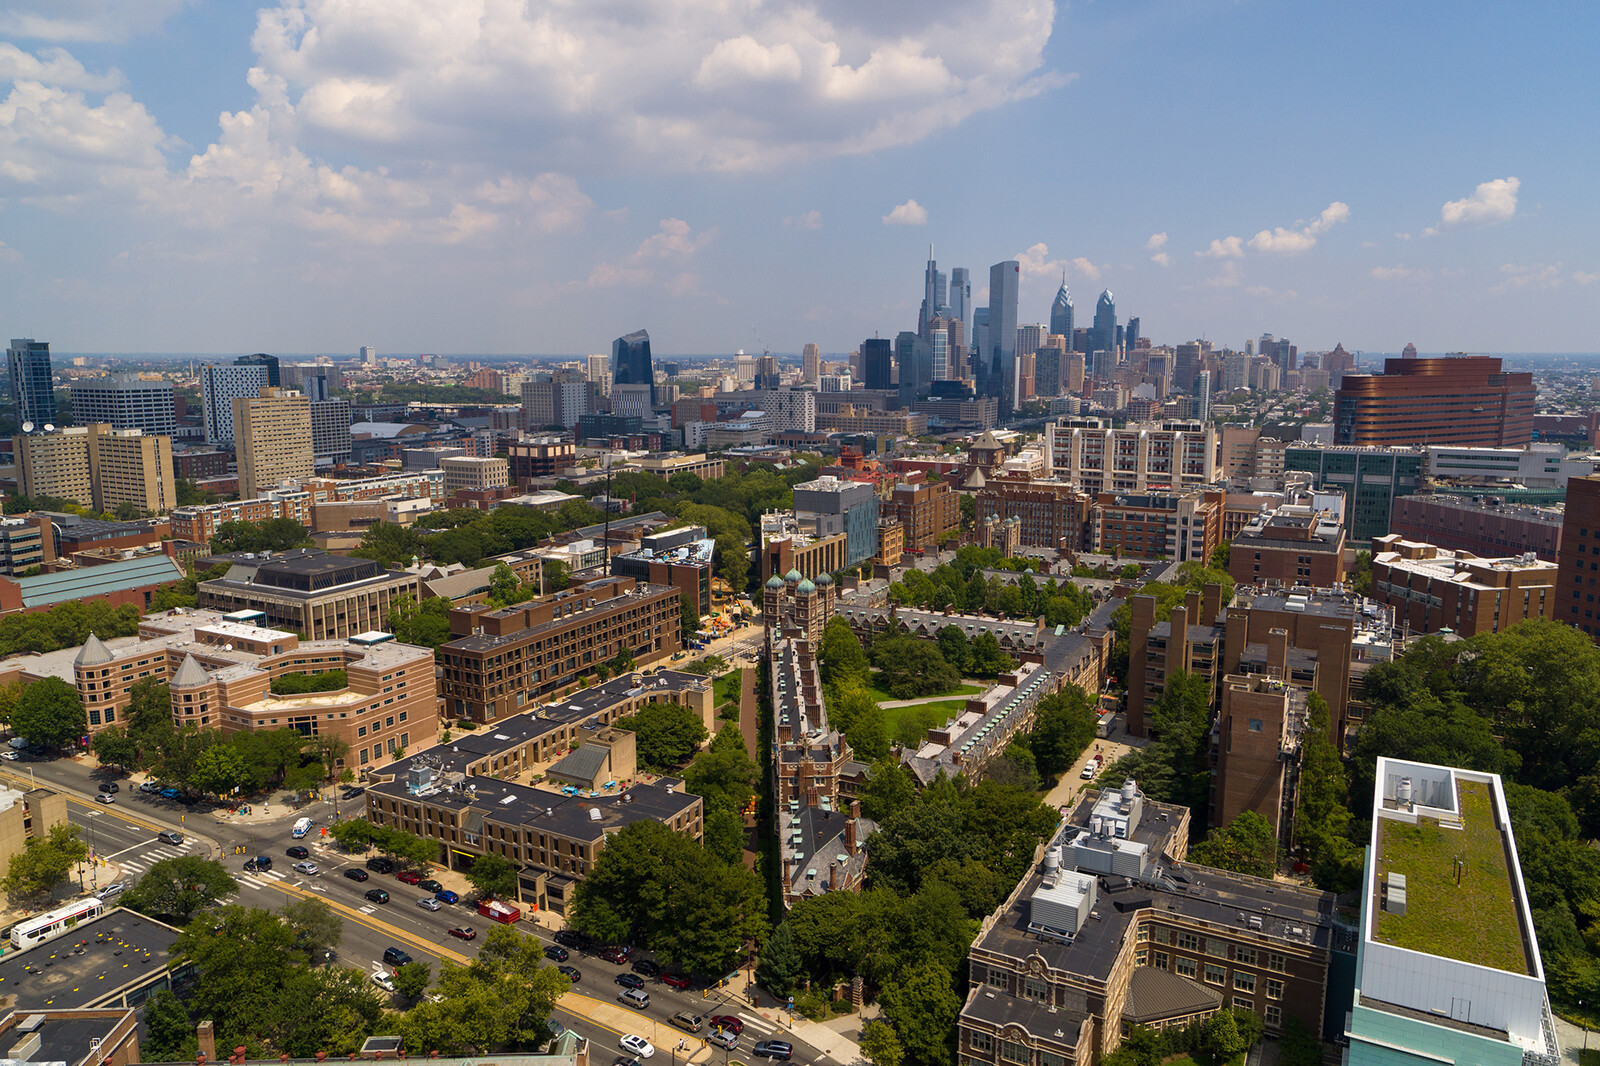 An aerial photograpgraph showing the historic Quadrangle with the Philly skyline in the background